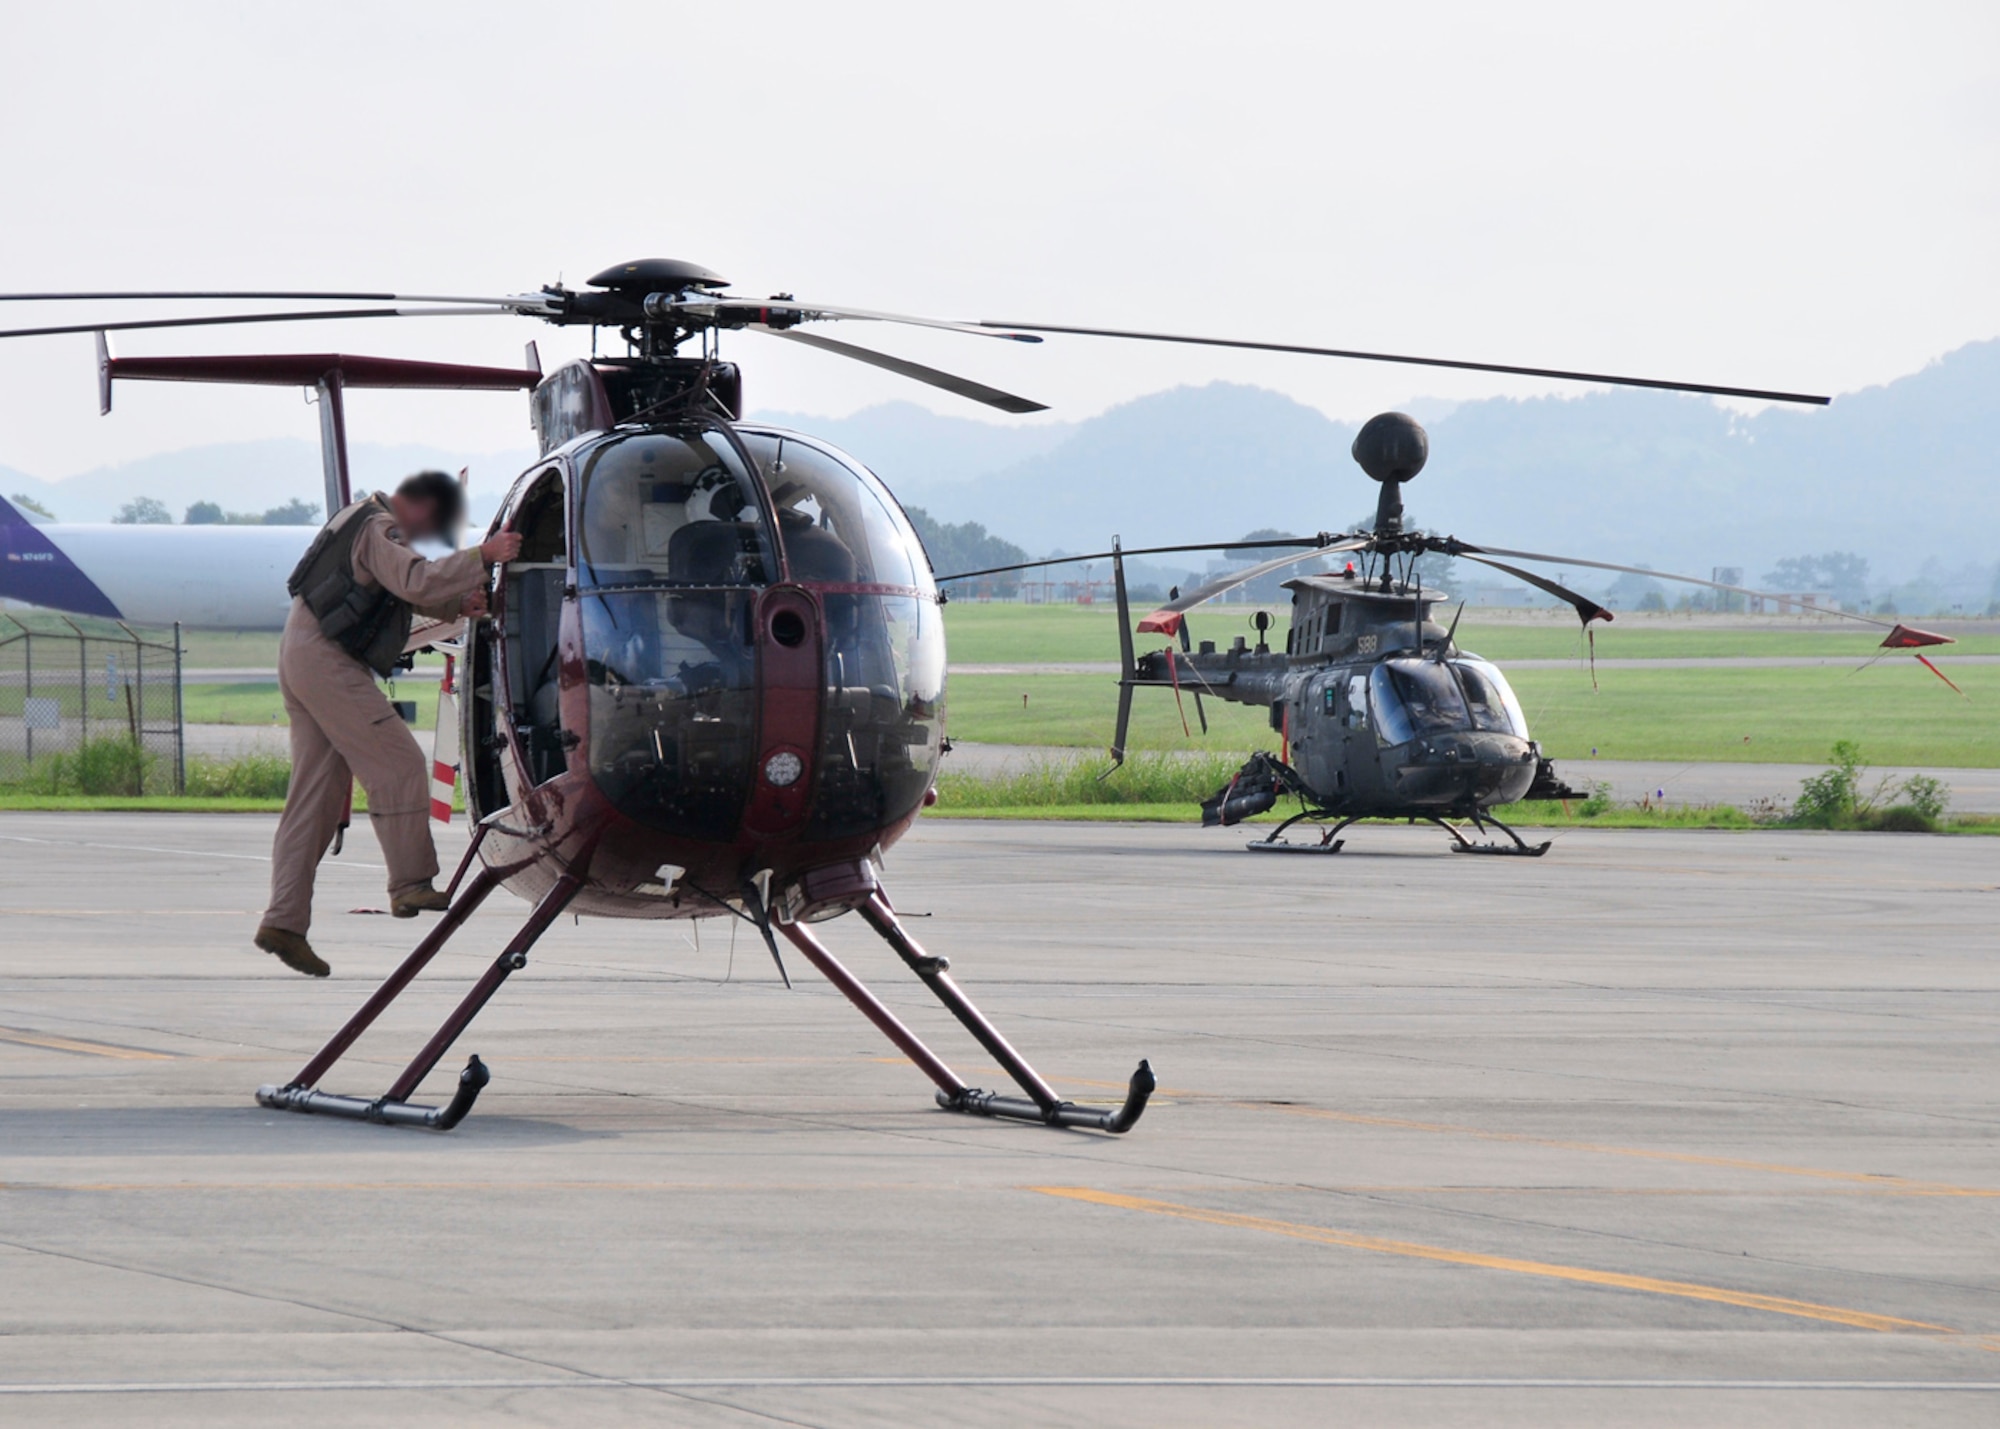 A DEA special agent conducts a pre-flight check prior to take-off at McGhee Tyson Air National Guard Base, TN as part of the aviation division's ERAD program.  (U.S. Air National Guard photo illustration by Master Sgt. Kendra M. Owenby, 134 ARW Public Affairs)